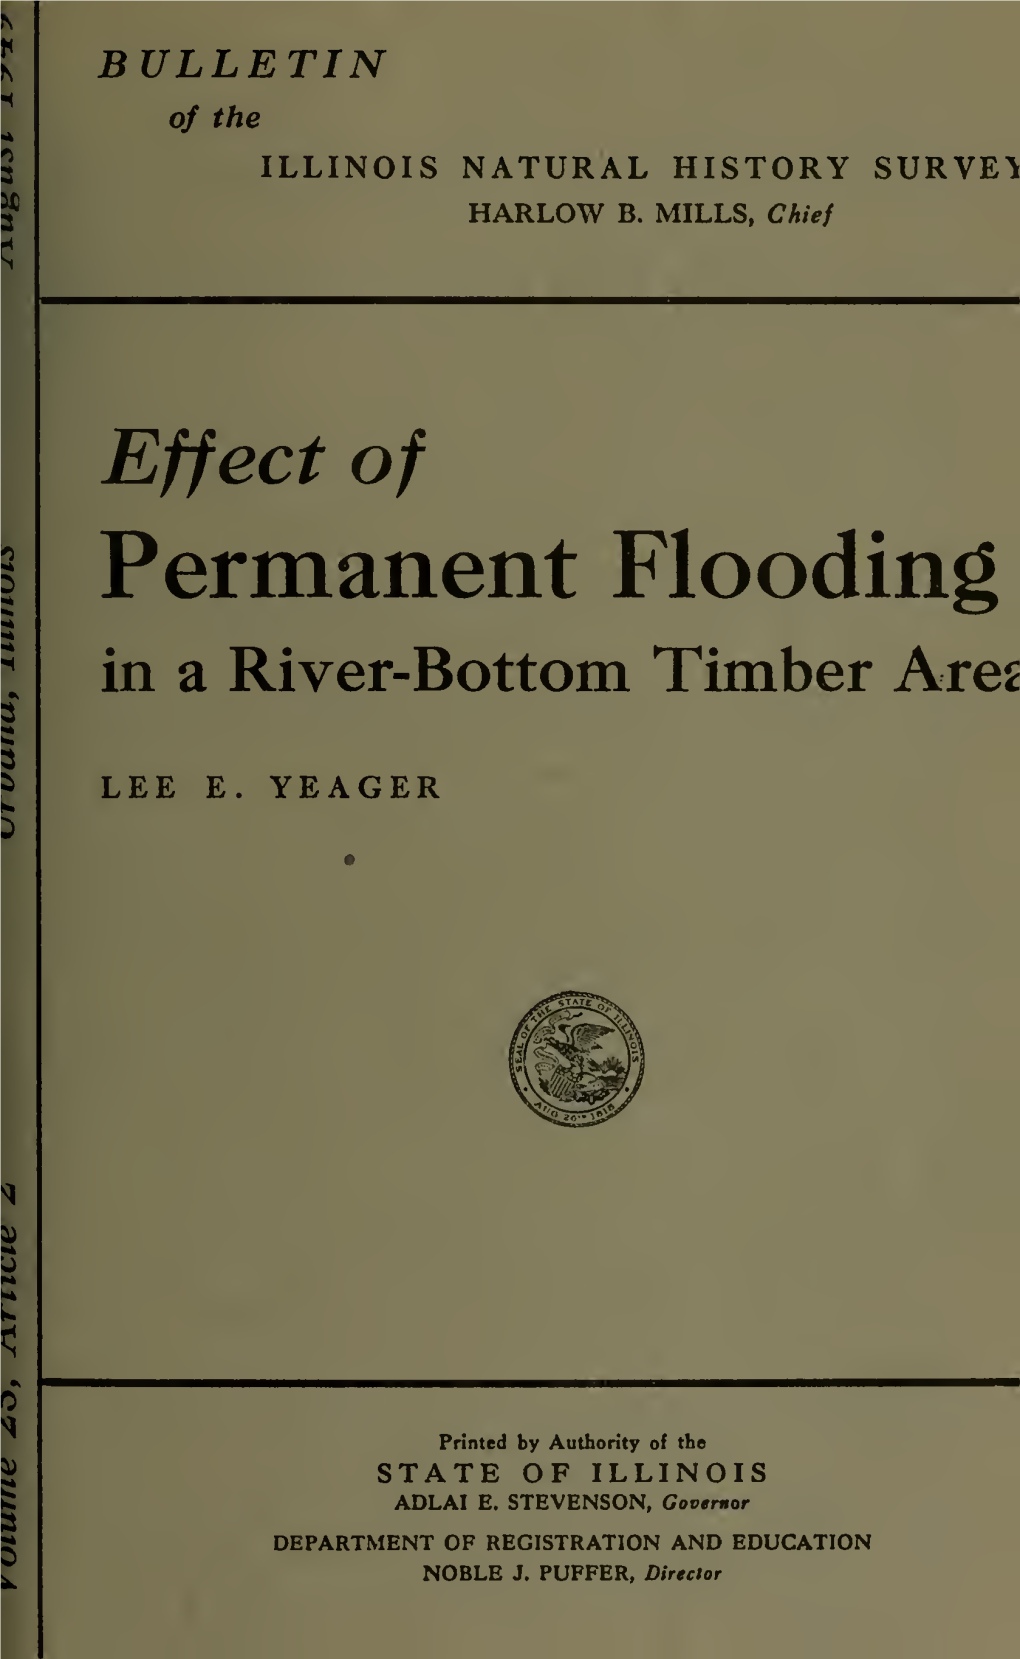 Permanent Flooding in a River-Bottom Timber Ares